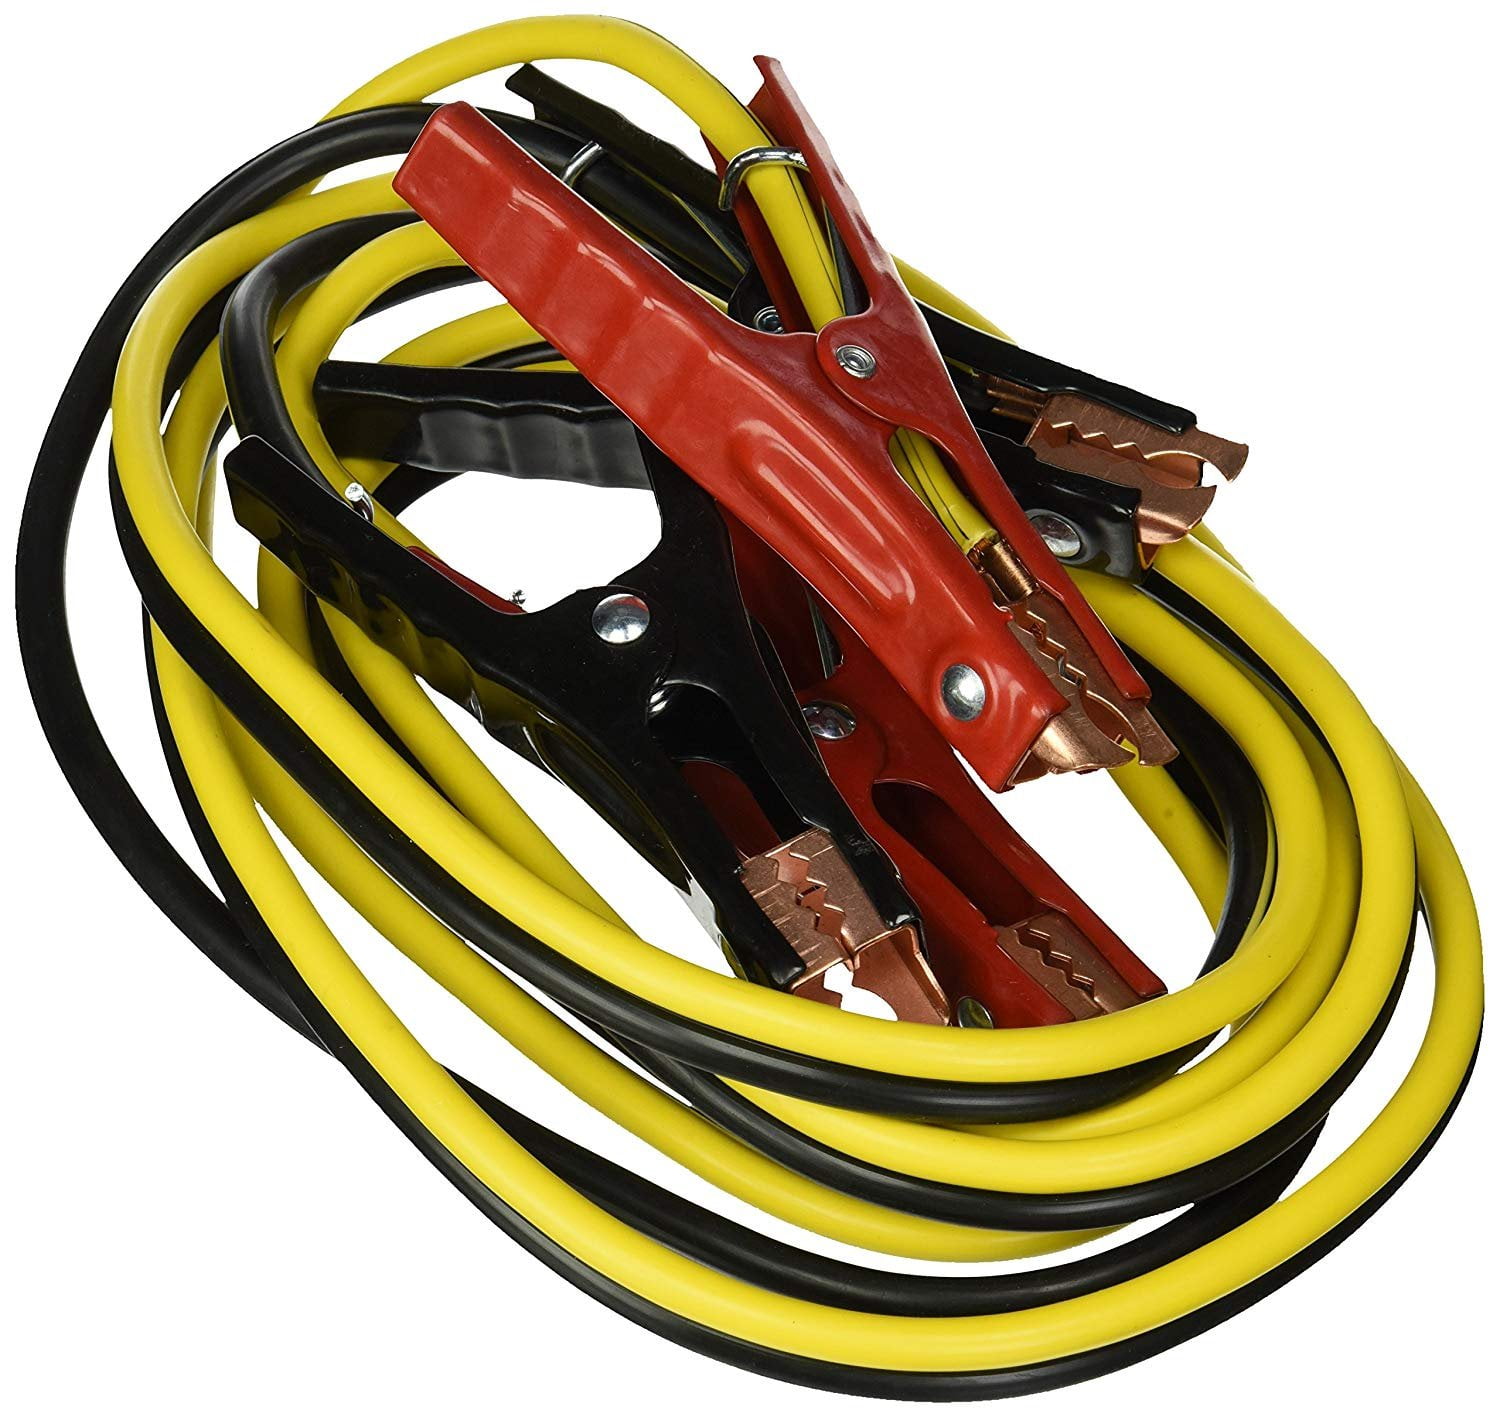 jumper cables with travel case